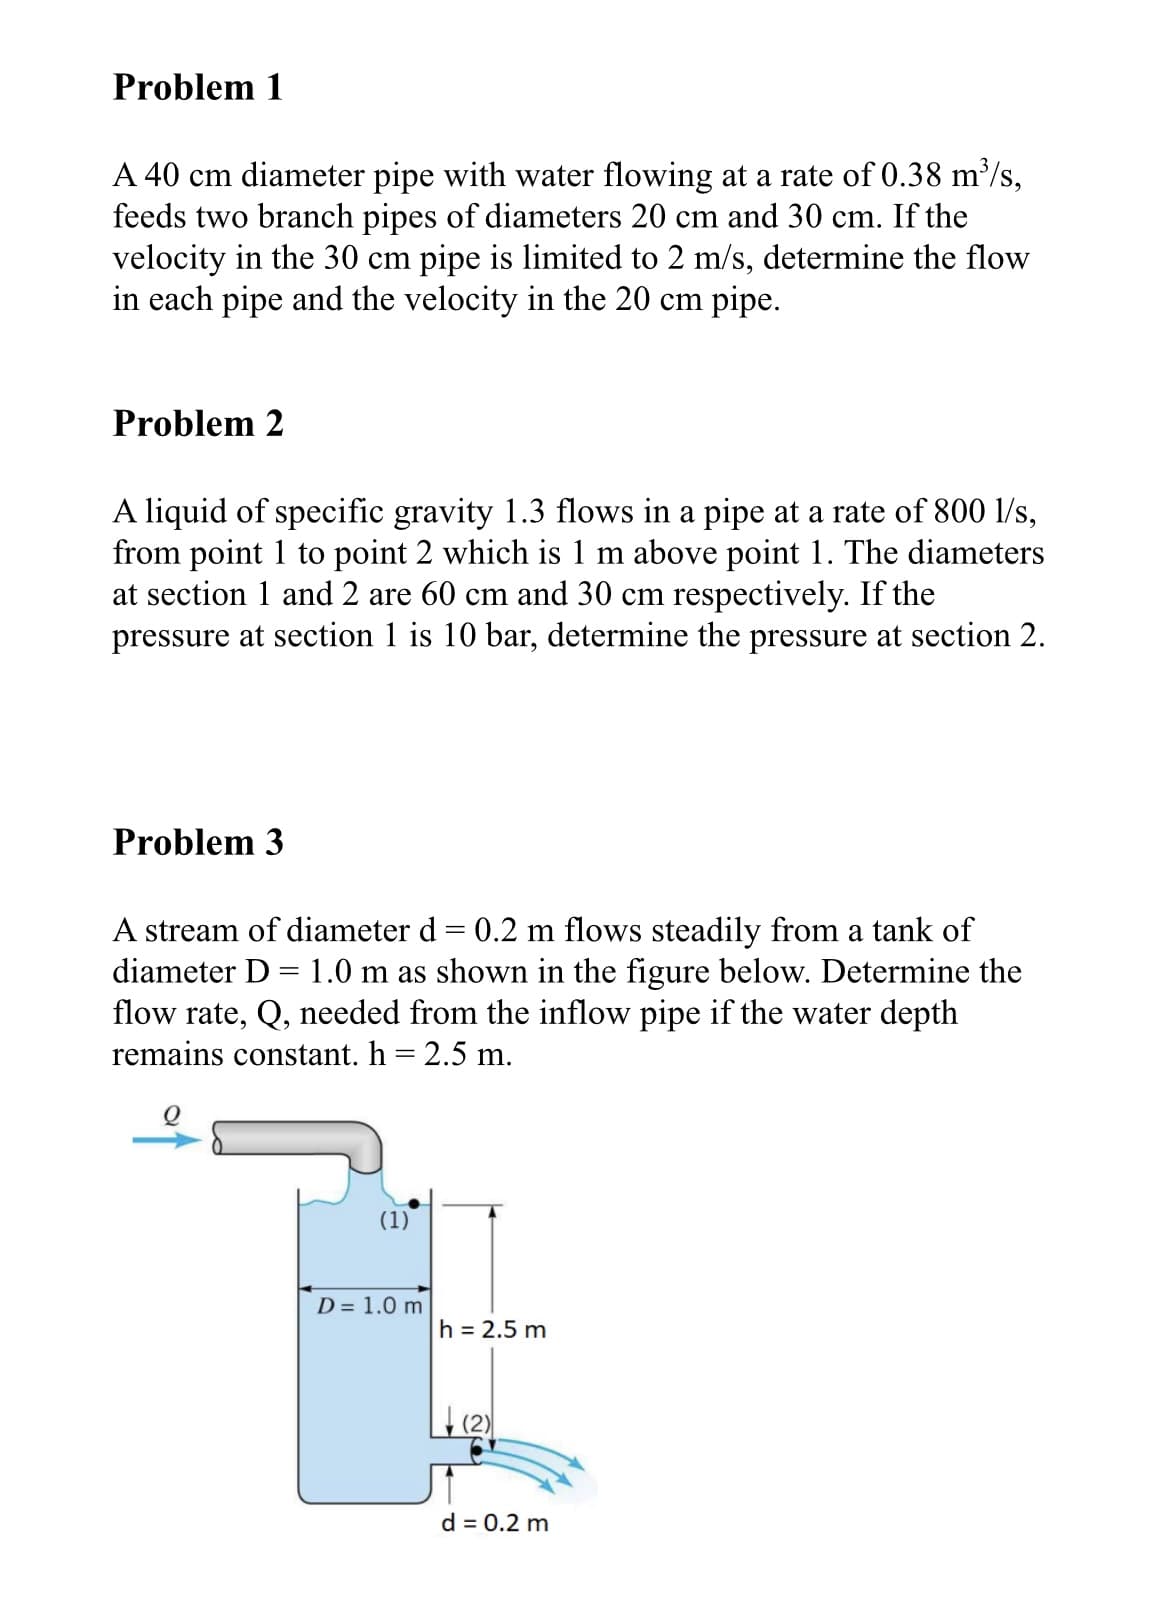 Problem 1
A 40 cm diameter pipe with water flowing at a rate of 0.38 m³/s,
feeds two branch pipes of diameters 20 cm and 30 cm. If the
velocity in the 30 cm pipe is limited to 2 m/s, determine the flow
in each pipe and the velocity in the 20 cm pipe.
Problem 2
A liquid of specific gravity 1.3 flows in a pipe at a rate of 800 l/s,
from point 1 to point 2 which is 1 m above point 1. The diameters
at section 1 and 2 are 60 cm and 30 cm respectively. If the
pressure at section 1 is 10 bar, determine the pressure at section 2.
Problem 3
A stream of diameter d = 0.2 m flows steadily from a tank of
diameter D = 1.0 m as shown in the figure below. Determine the
flow rate, Q, needed from the inflow pipe if the water depth
remains constant. h = 2.5 m.
(1)
D = 1.0 m
h = 2.5 m
d = 0.2 m